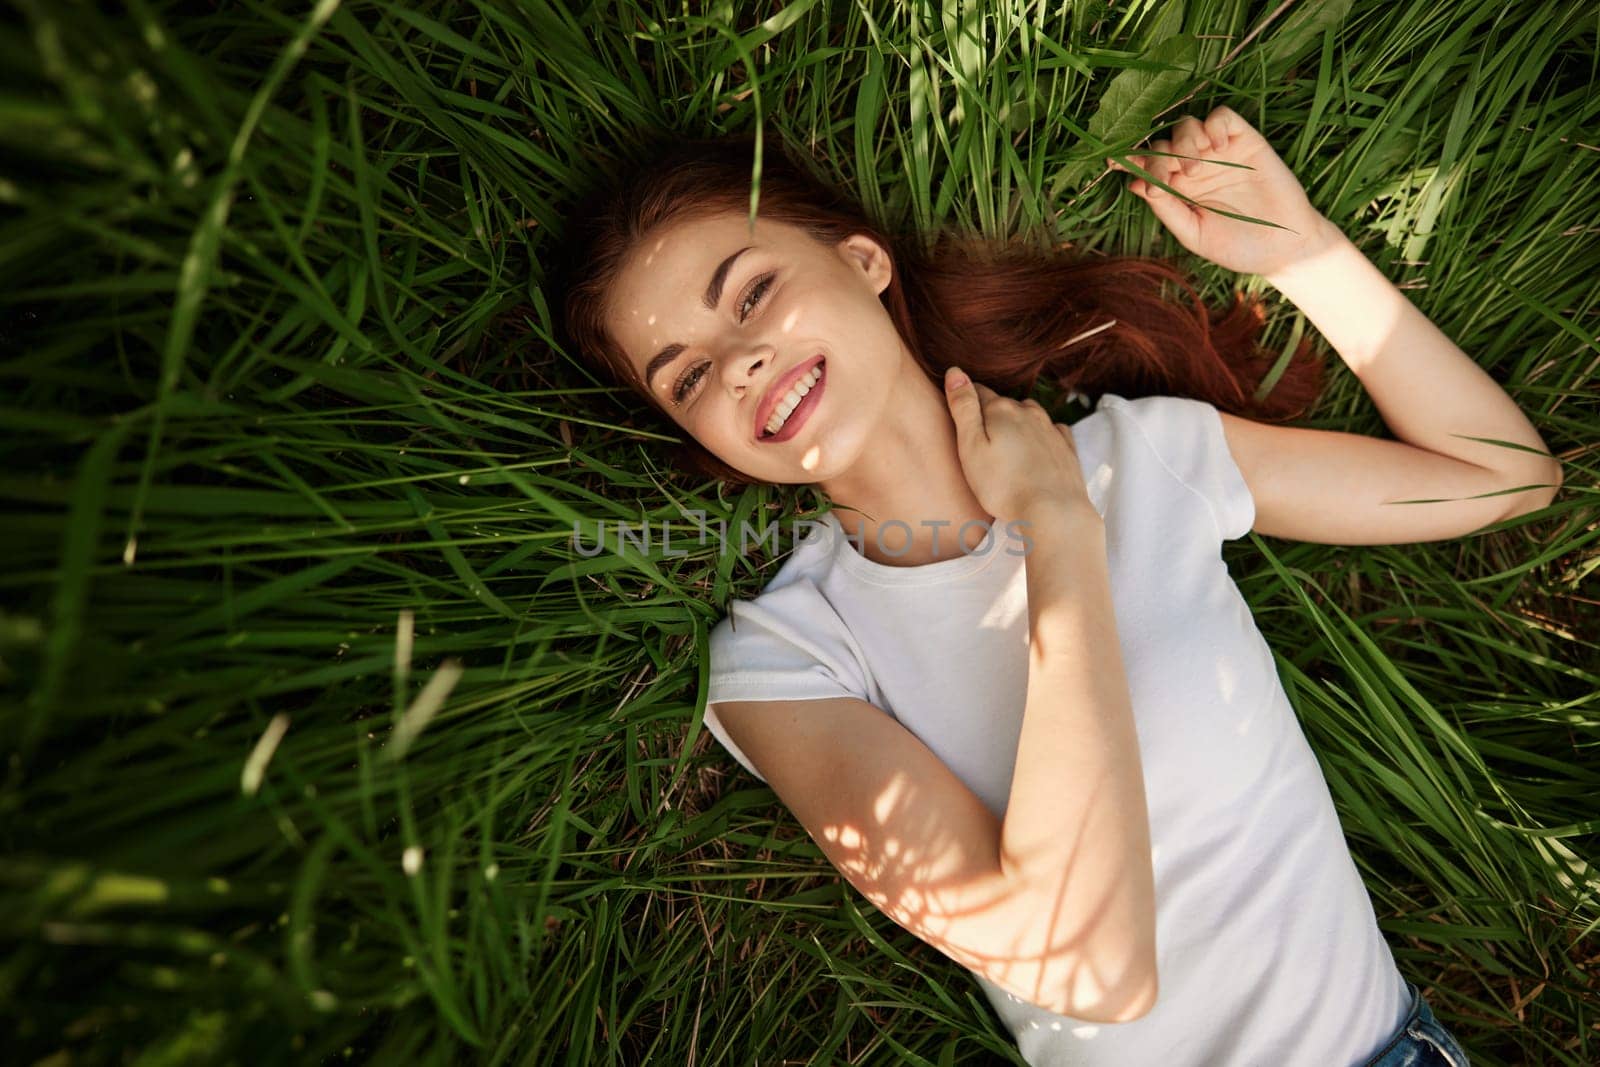 woman basking in the sun lying in tall grass. High quality photo